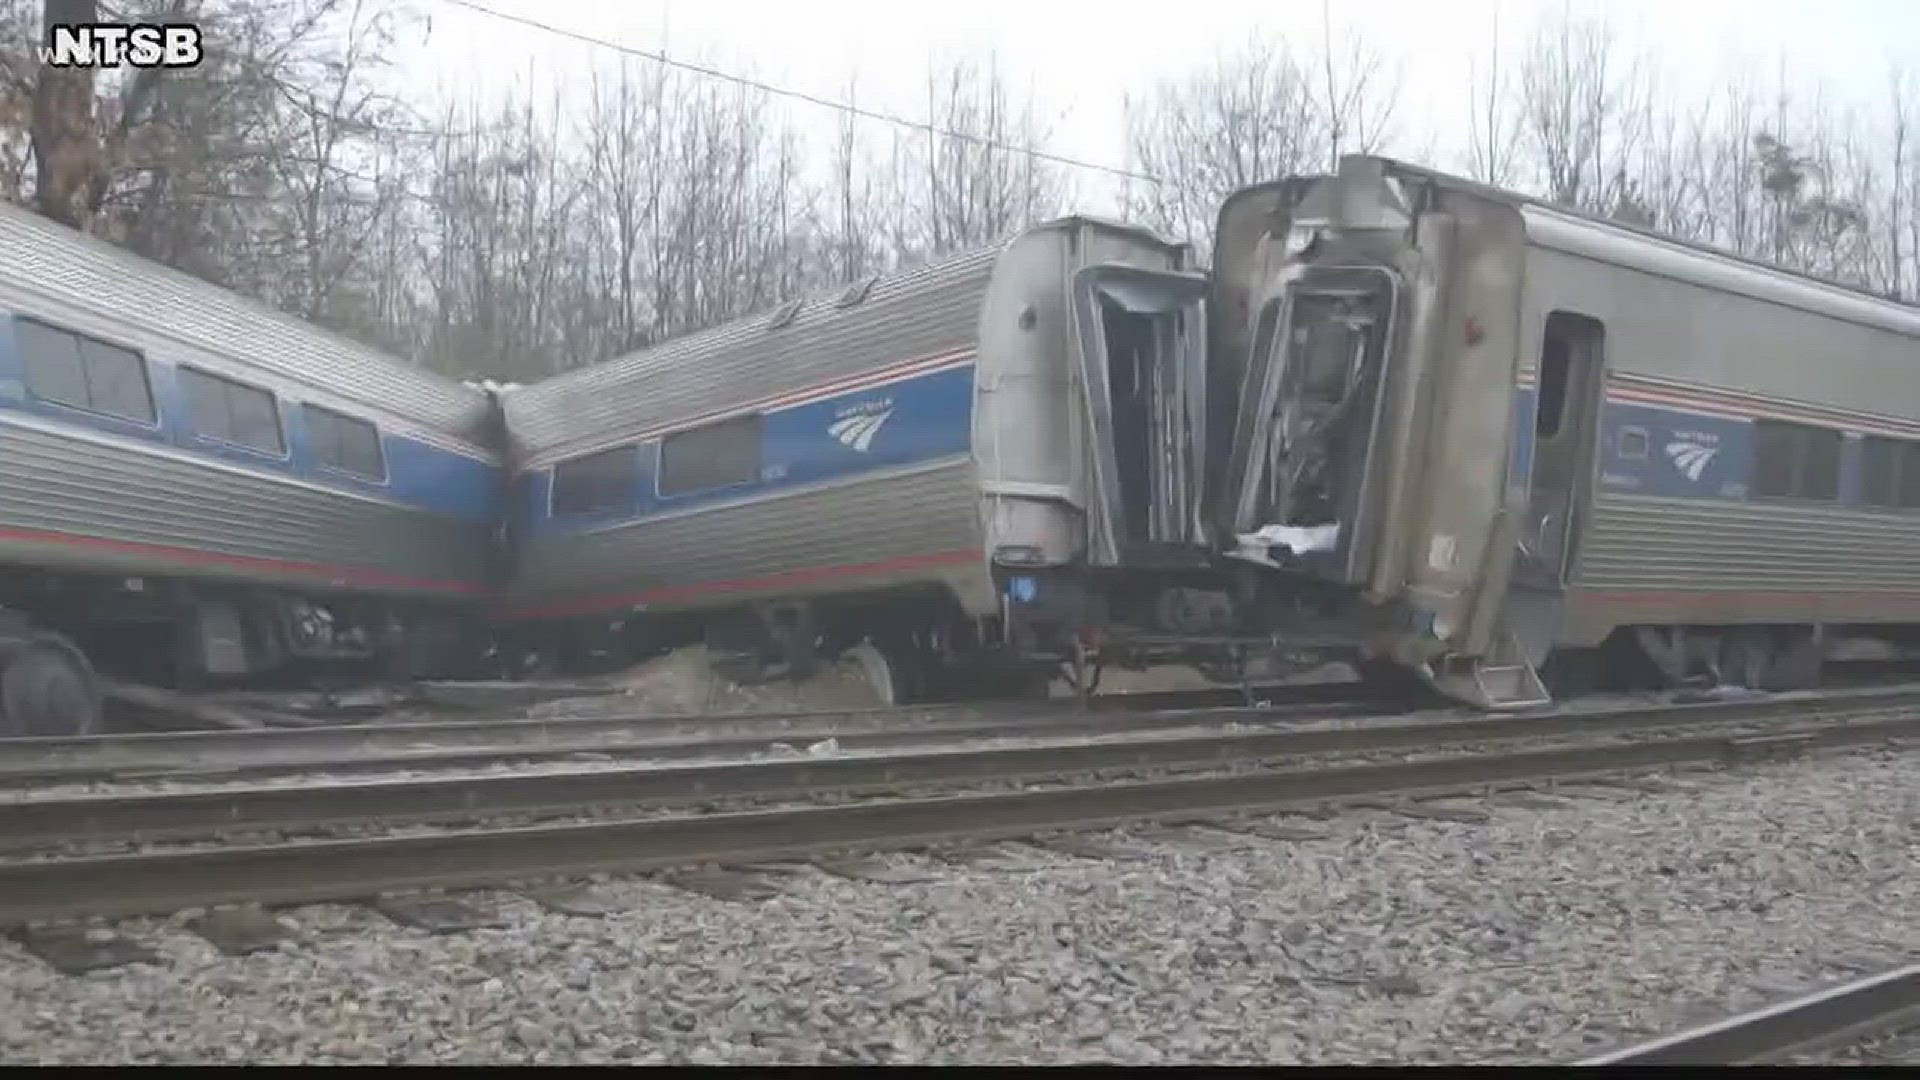 The report confirms a hand thrown switch was in the wrong position causing the train to crash head-on.